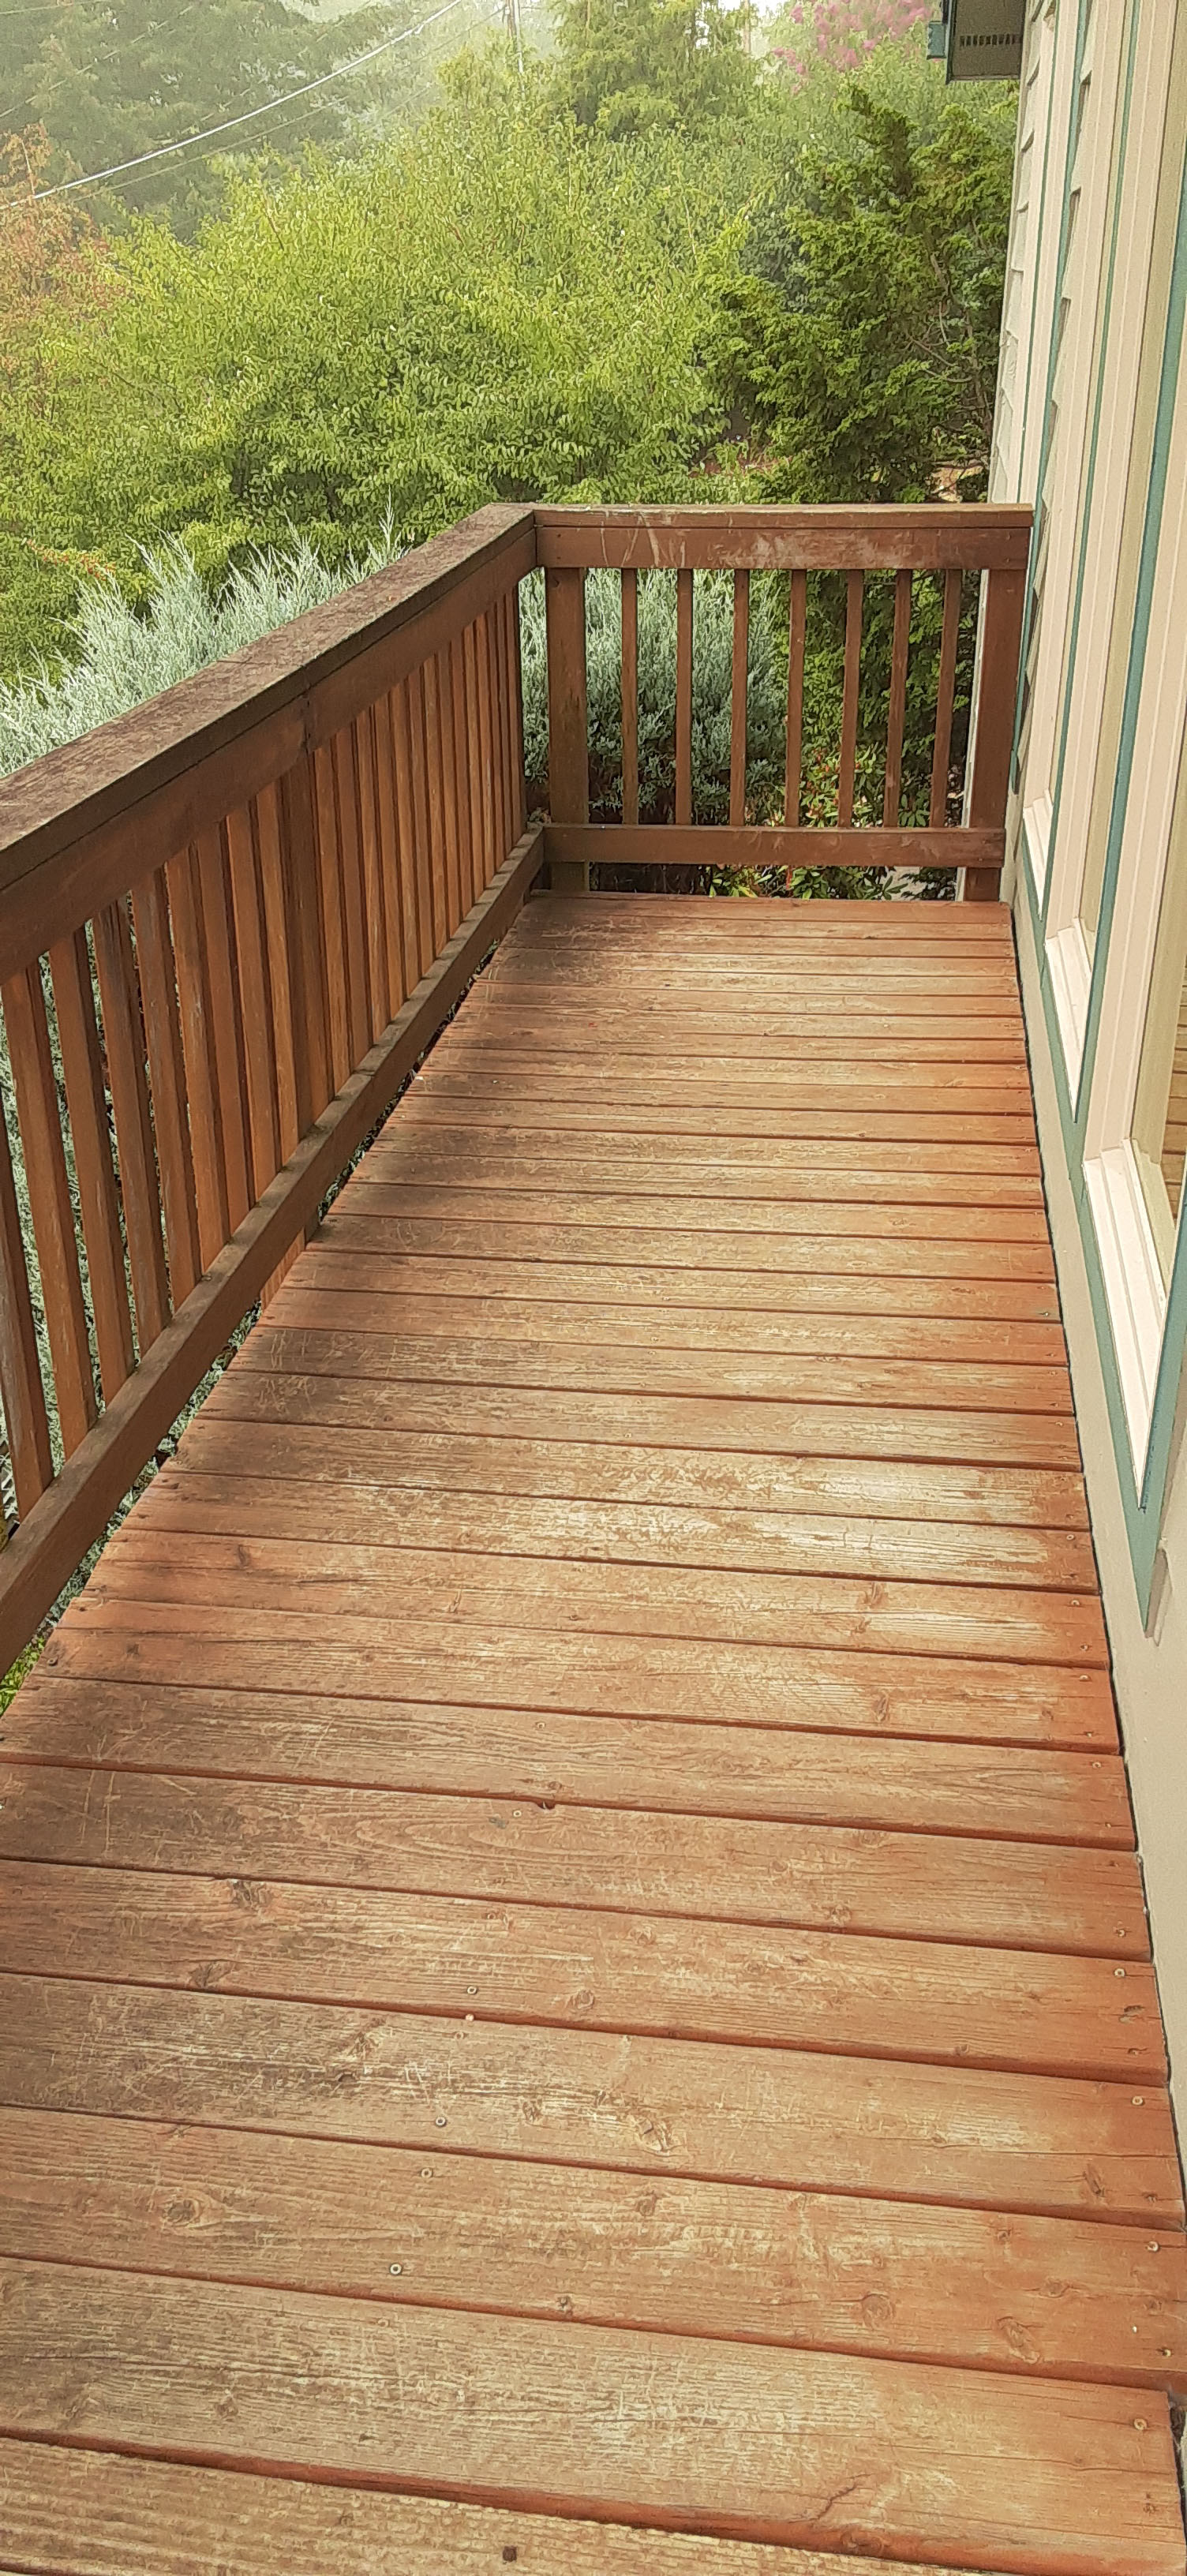 Old, scratched up wood deck in need of remodeling